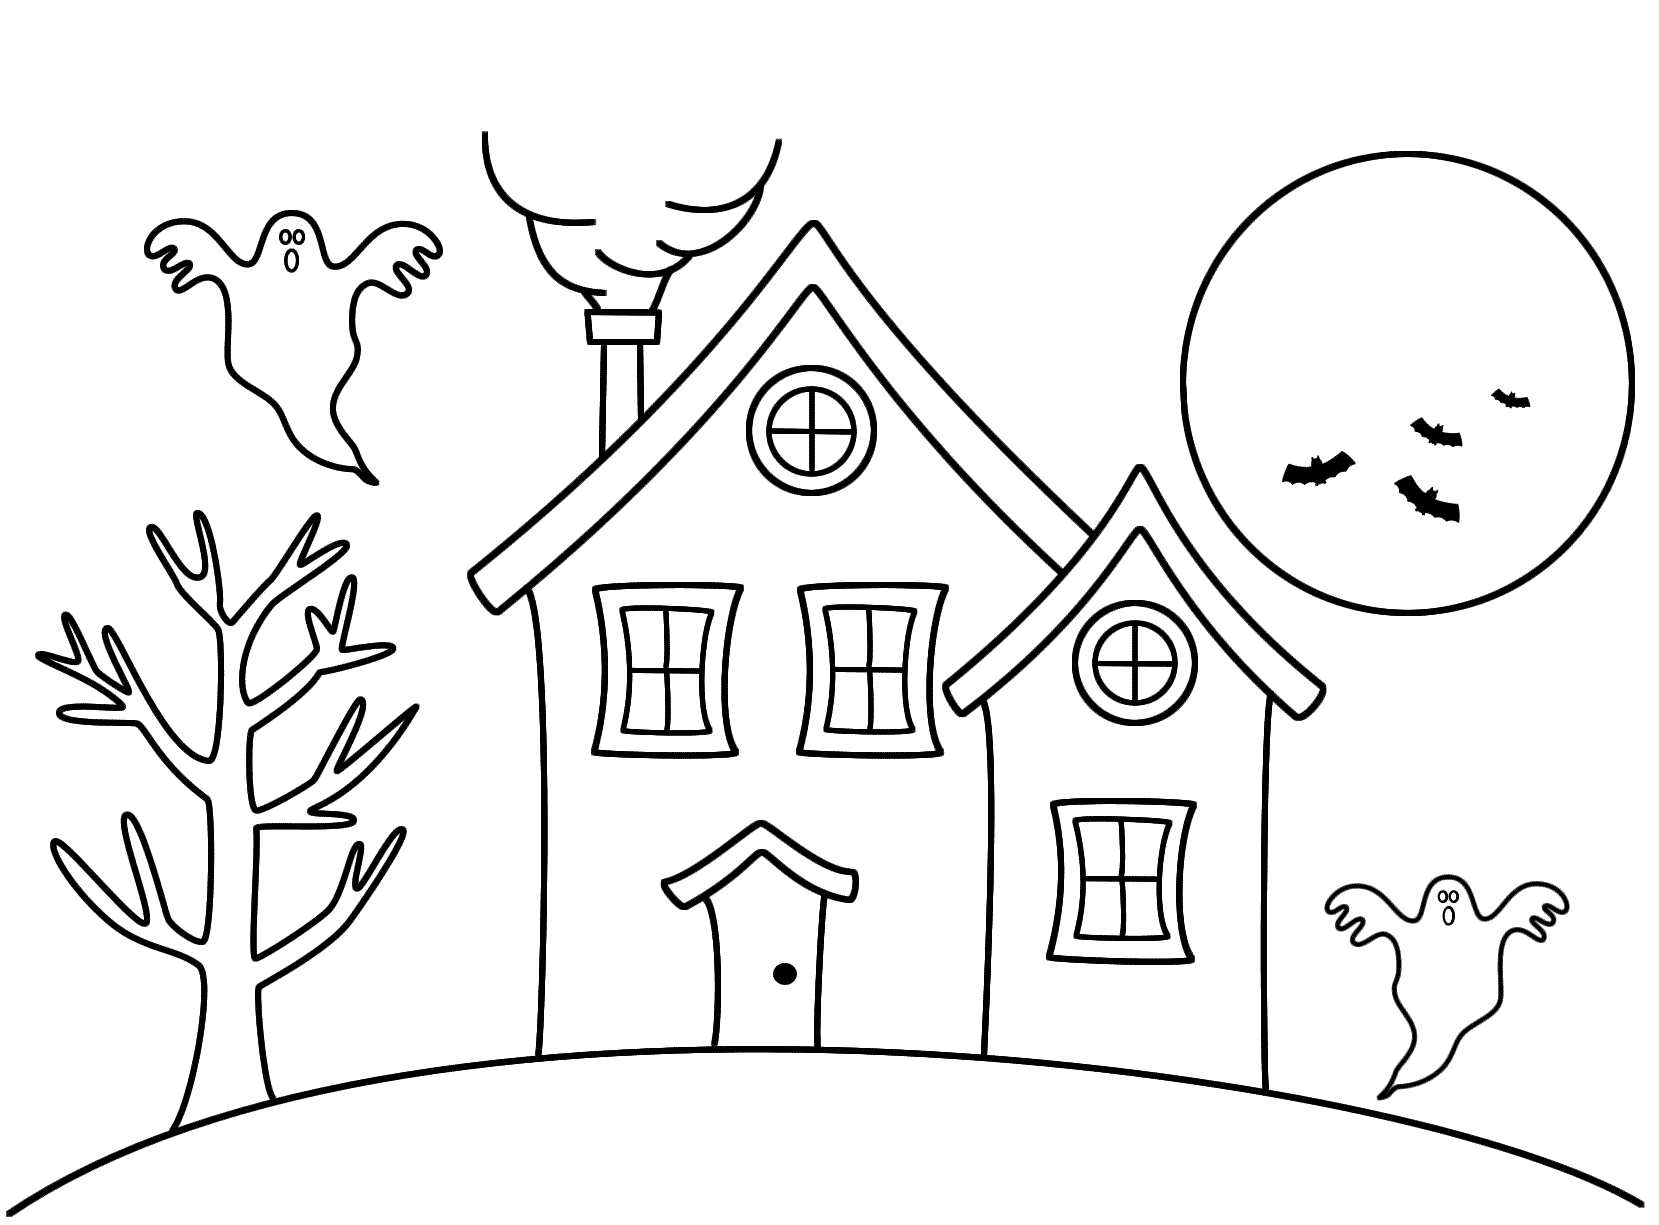 Big Haunted House Coloring Page - Coloring Home